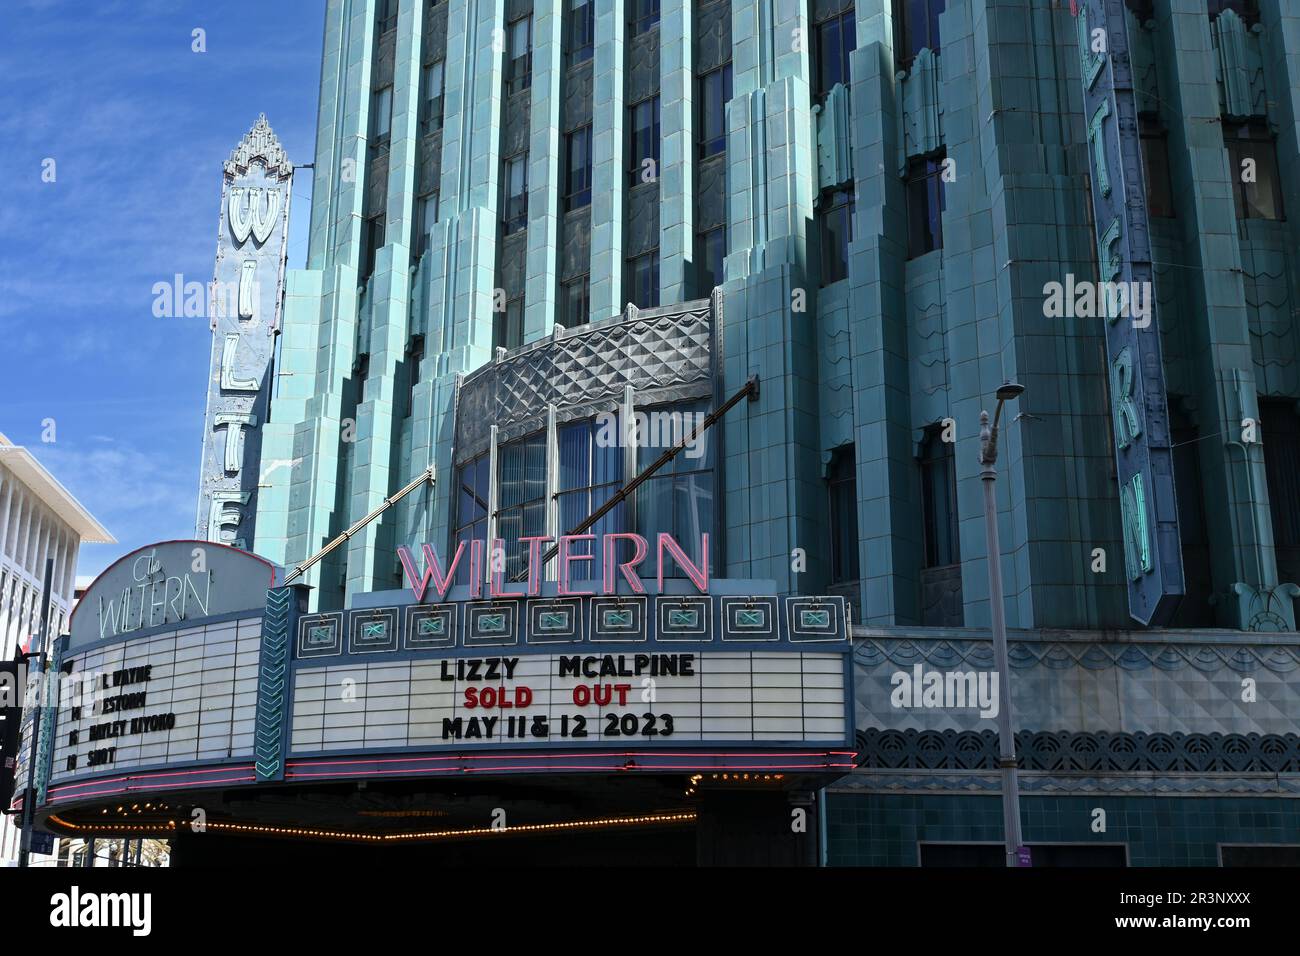 LOS ANGELES, CALIFORNIA - 12 MAY 2023: The Wiltern Theatre marquee on the iconic art deco building on Wilshire Boulevard. Stock Photo